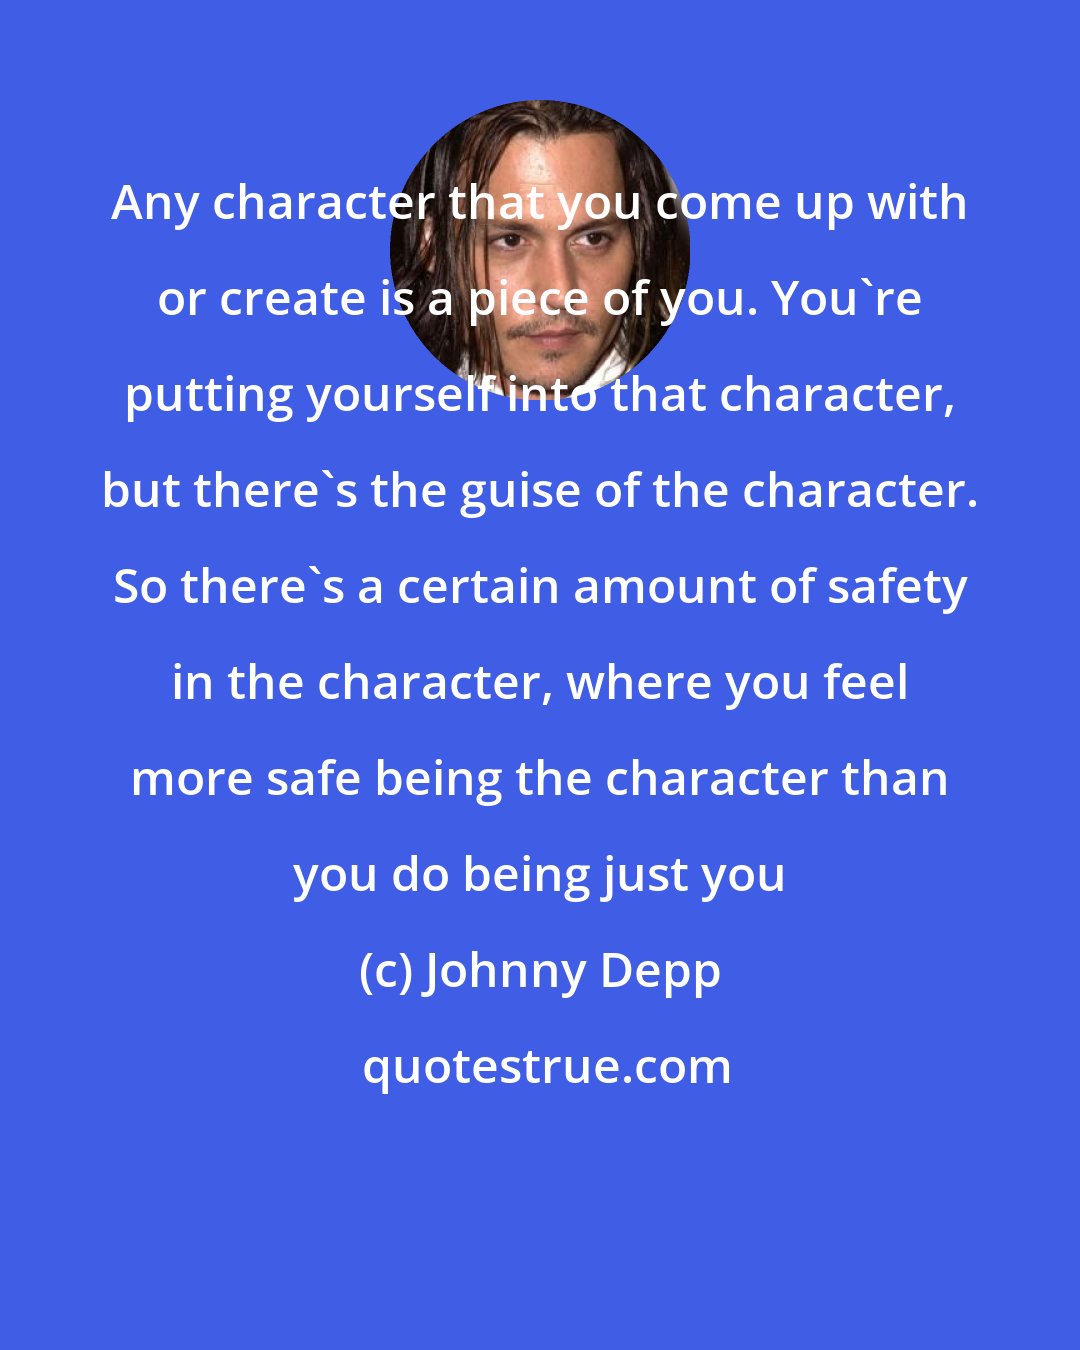 Johnny Depp: Any character that you come up with or create is a piece of you. You're putting yourself into that character, but there's the guise of the character. So there's a certain amount of safety in the character, where you feel more safe being the character than you do being just you